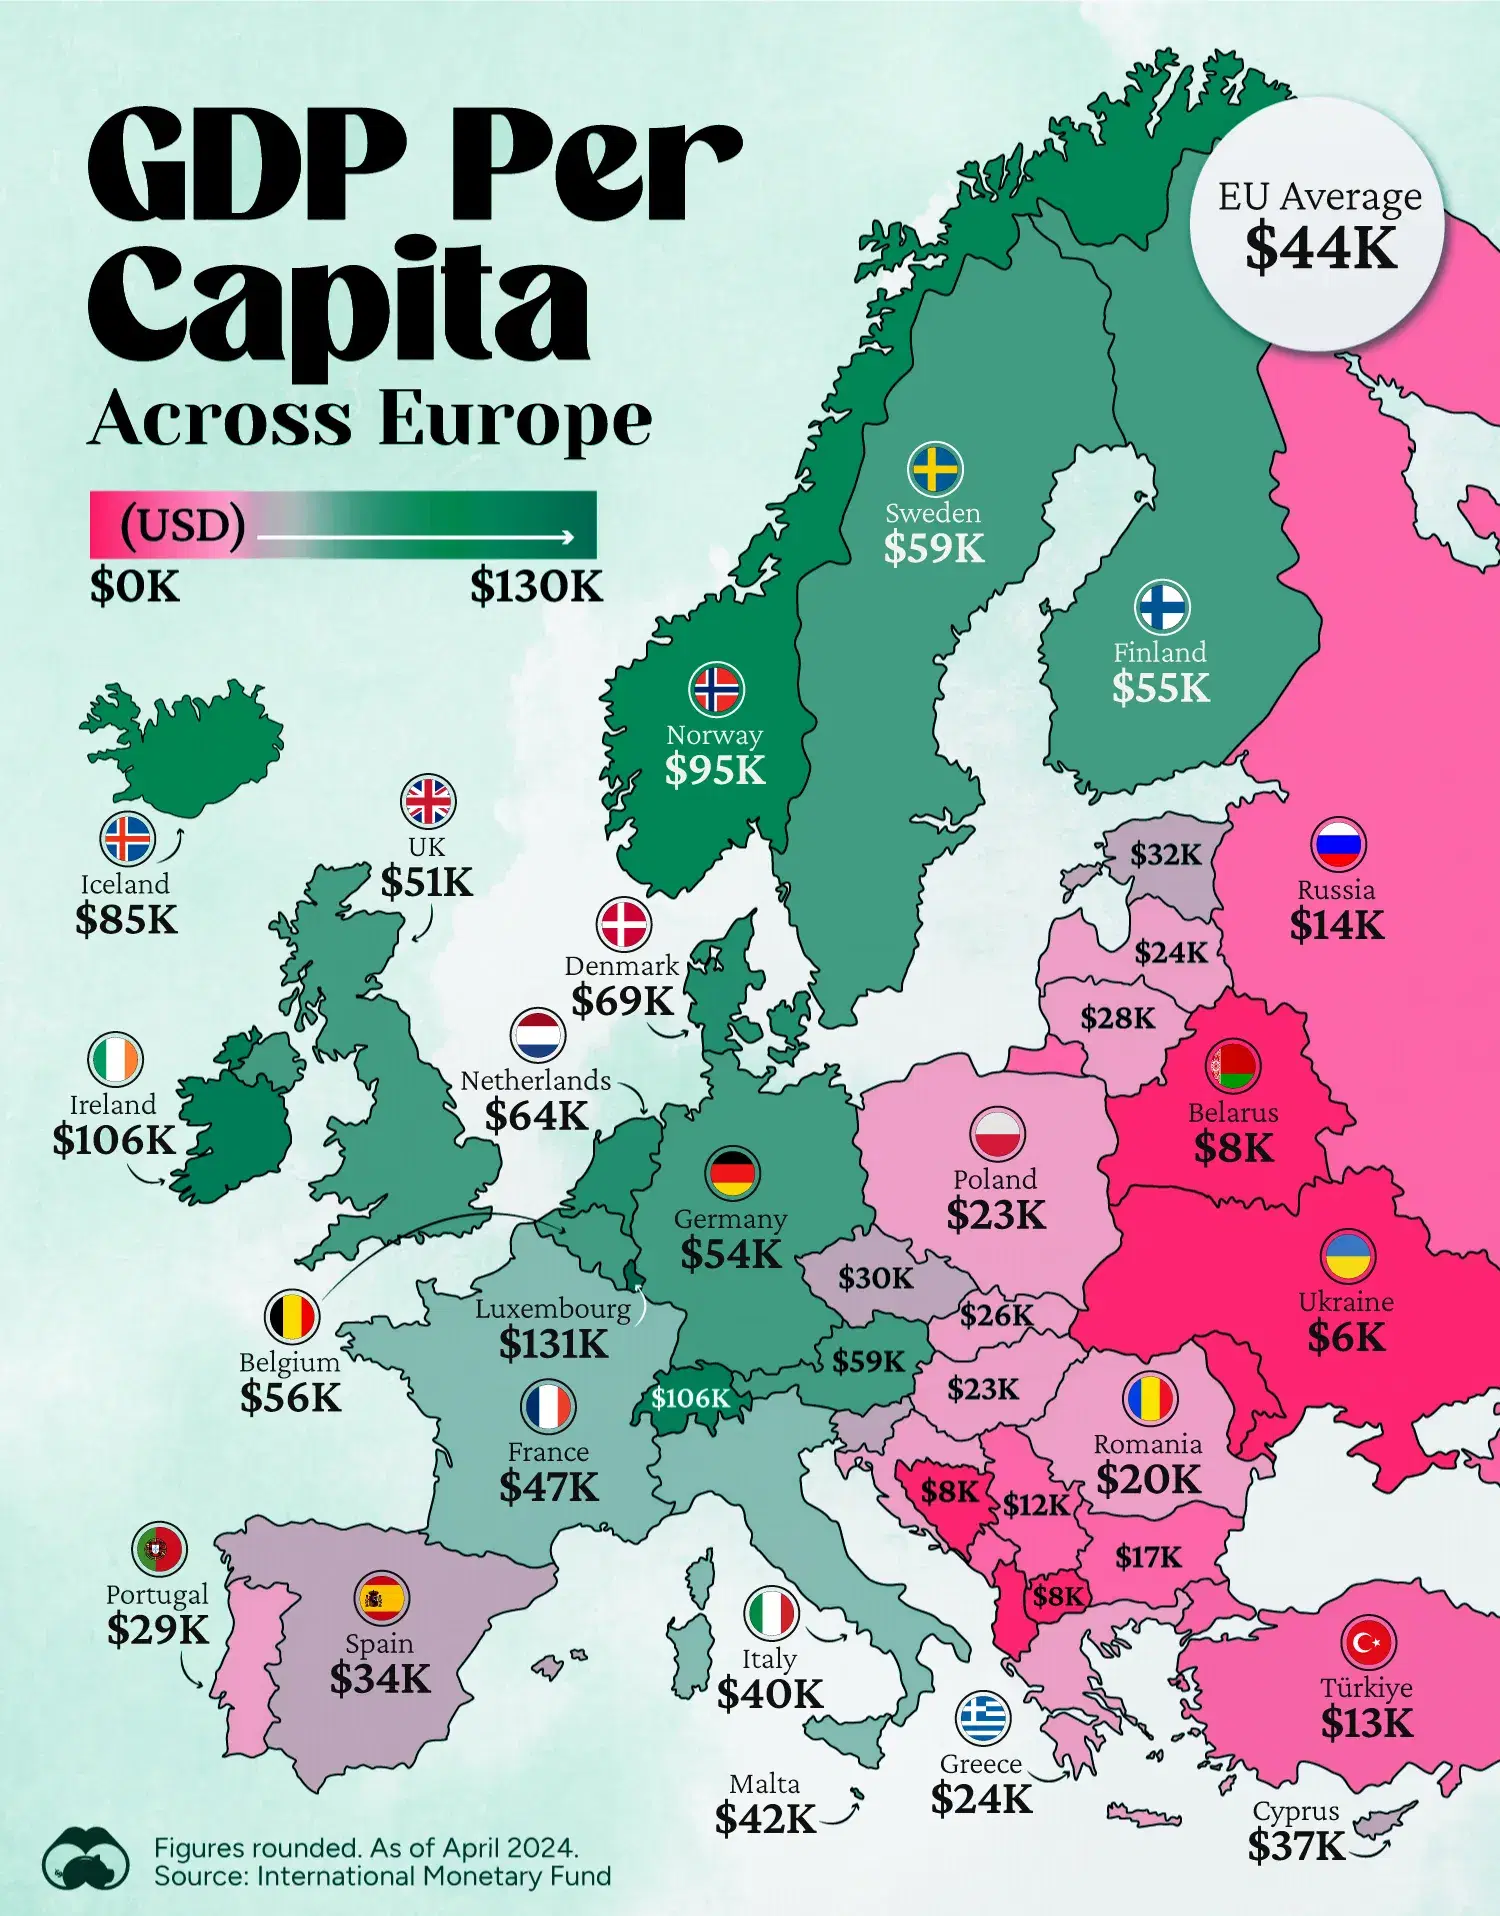 Luxembourg, Ireland, and Switzerland are Europe’s Richest Countries 🇪🇺